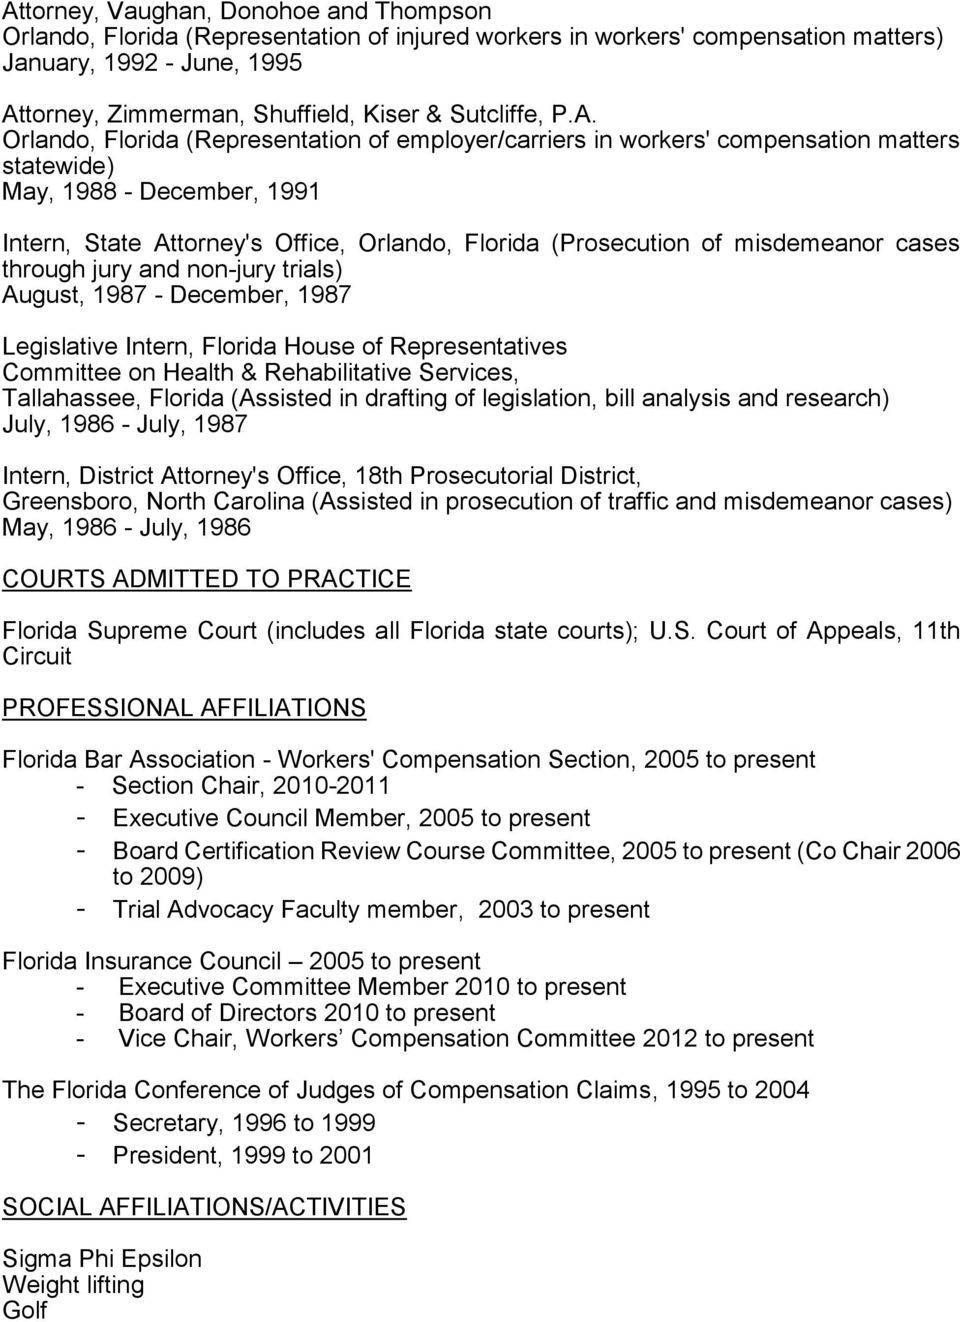 Orlando, Florida (Representation of employer/carriers in workers' compensation matters statewide) May, 1988 - December, 1991 Intern, State Attorney's Office, Orlando, Florida (Prosecution of